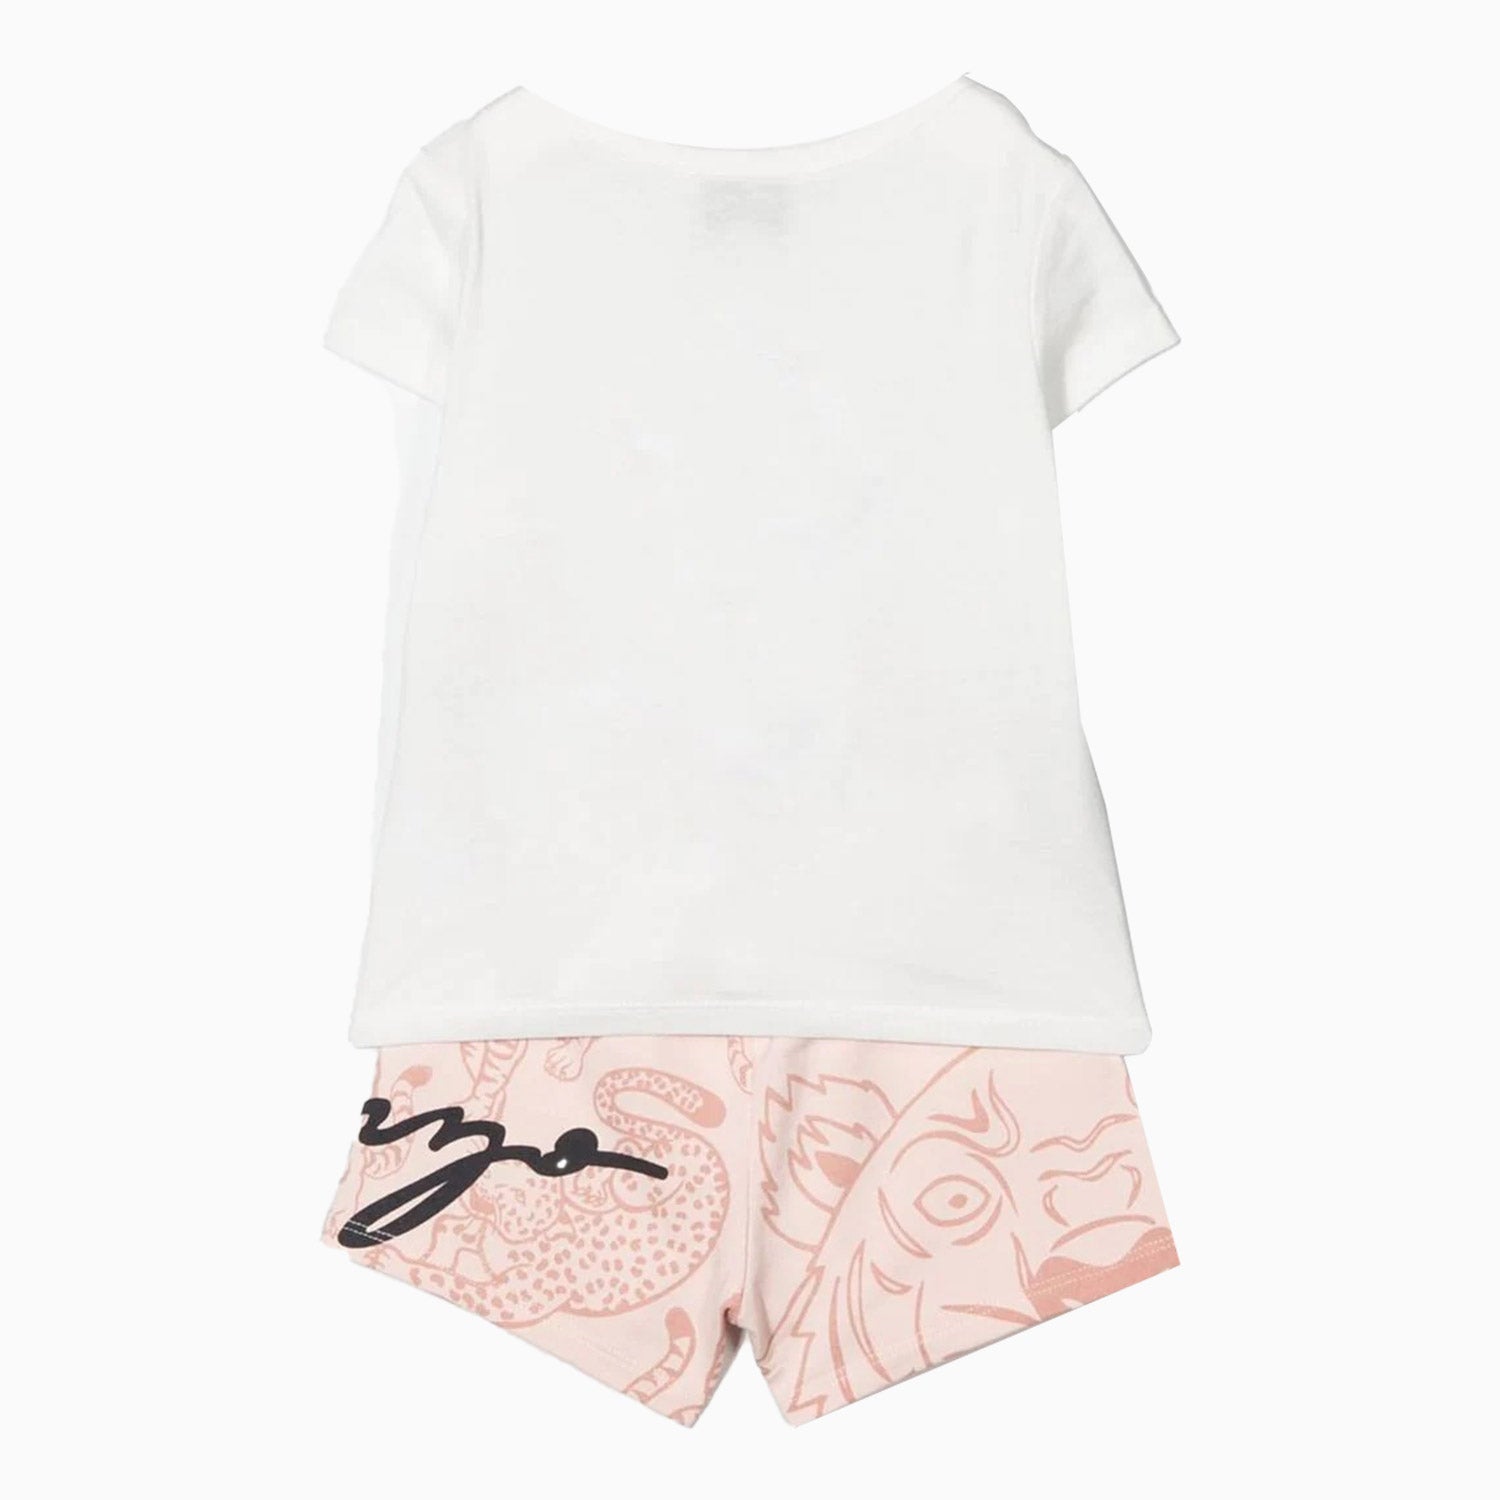 Kenzo Kid's Tiger Print Outfit Toddlers - Color: Rose Pink - Kids Premium Clothing -